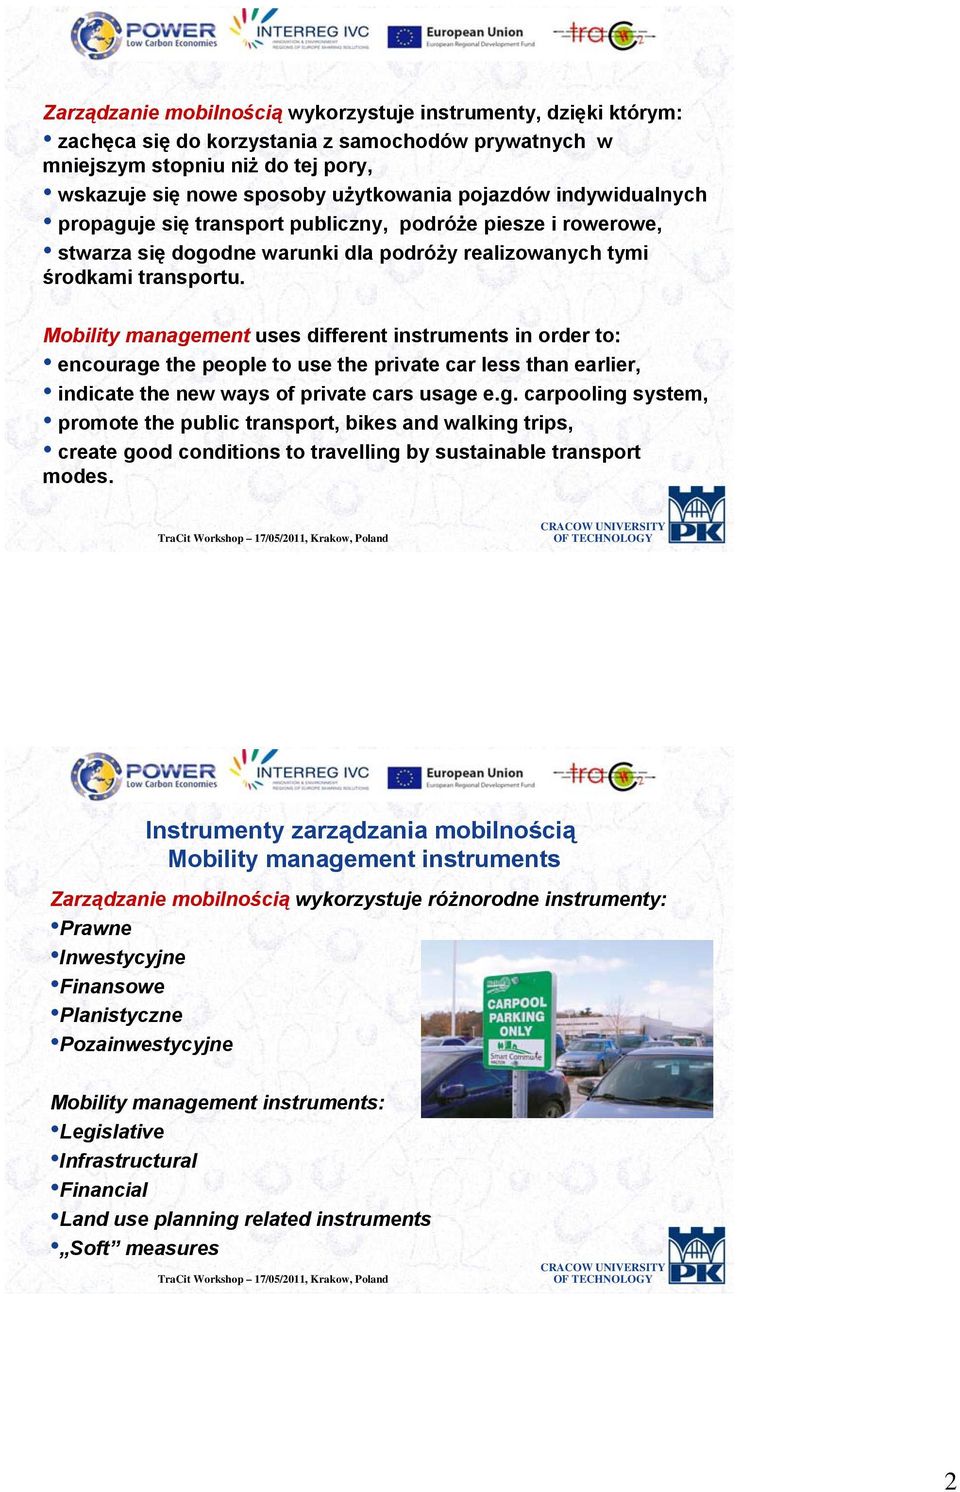 Mobility management uses different instruments in order to: encourage the people to use the private car less than earlier, indicate the new ways of private cars usage e.g. carpooling system, promote the public transport, bikes and walking trips, create good conditions to travelling by sustainable transport modes.